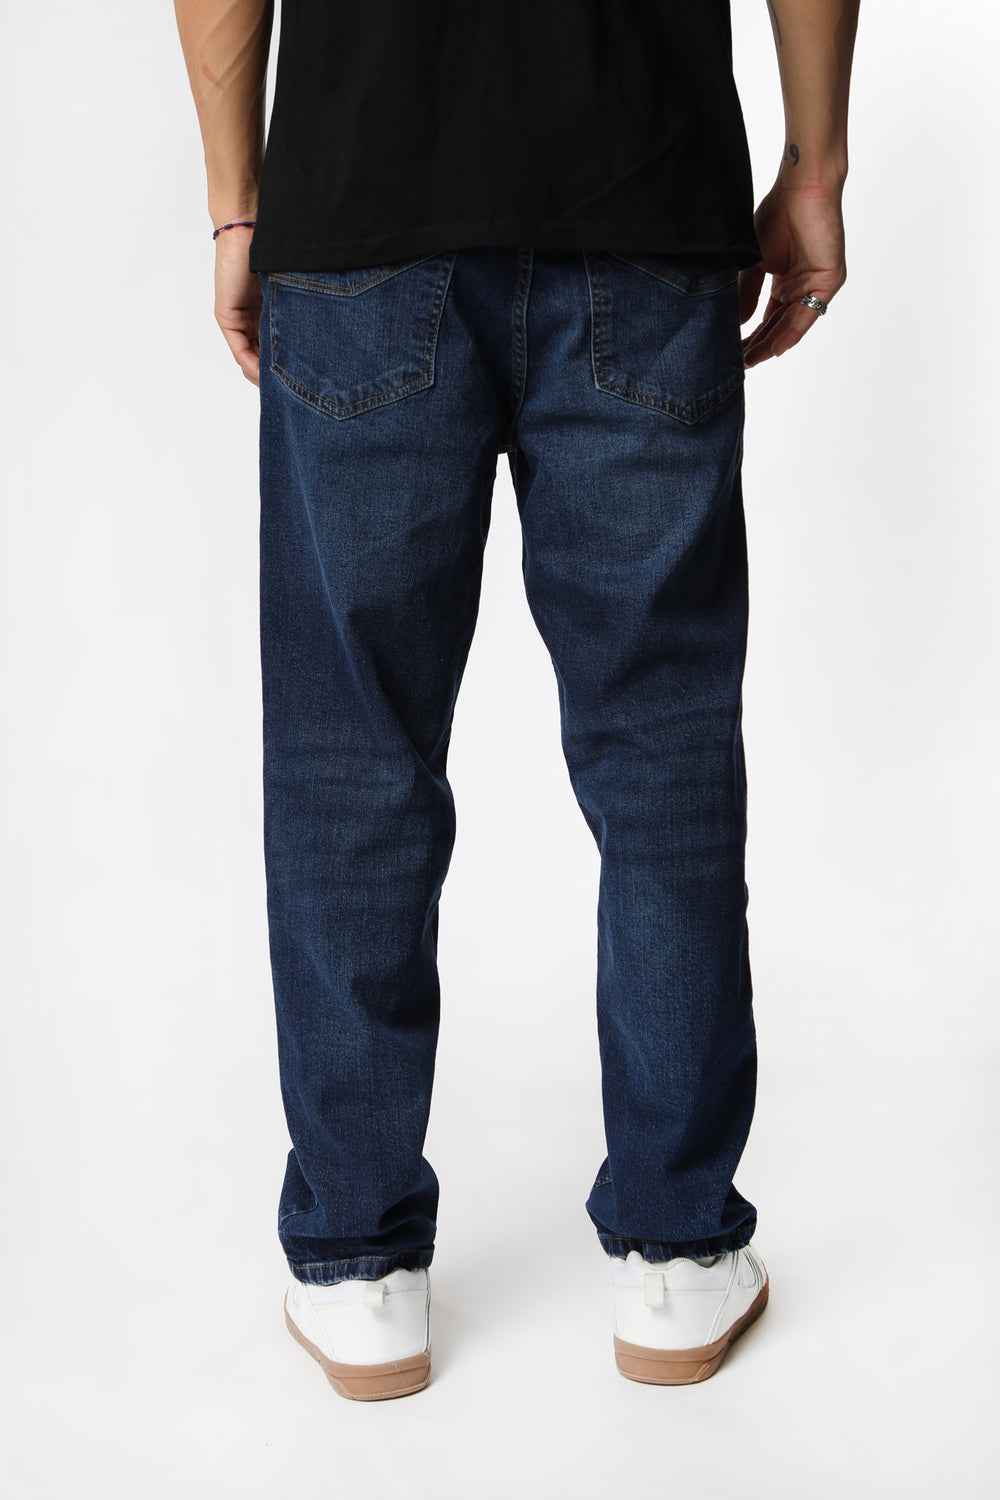 West49 Mens Dark Stone Relaxed Jeans West49 Mens Dark Stone Relaxed Jeans